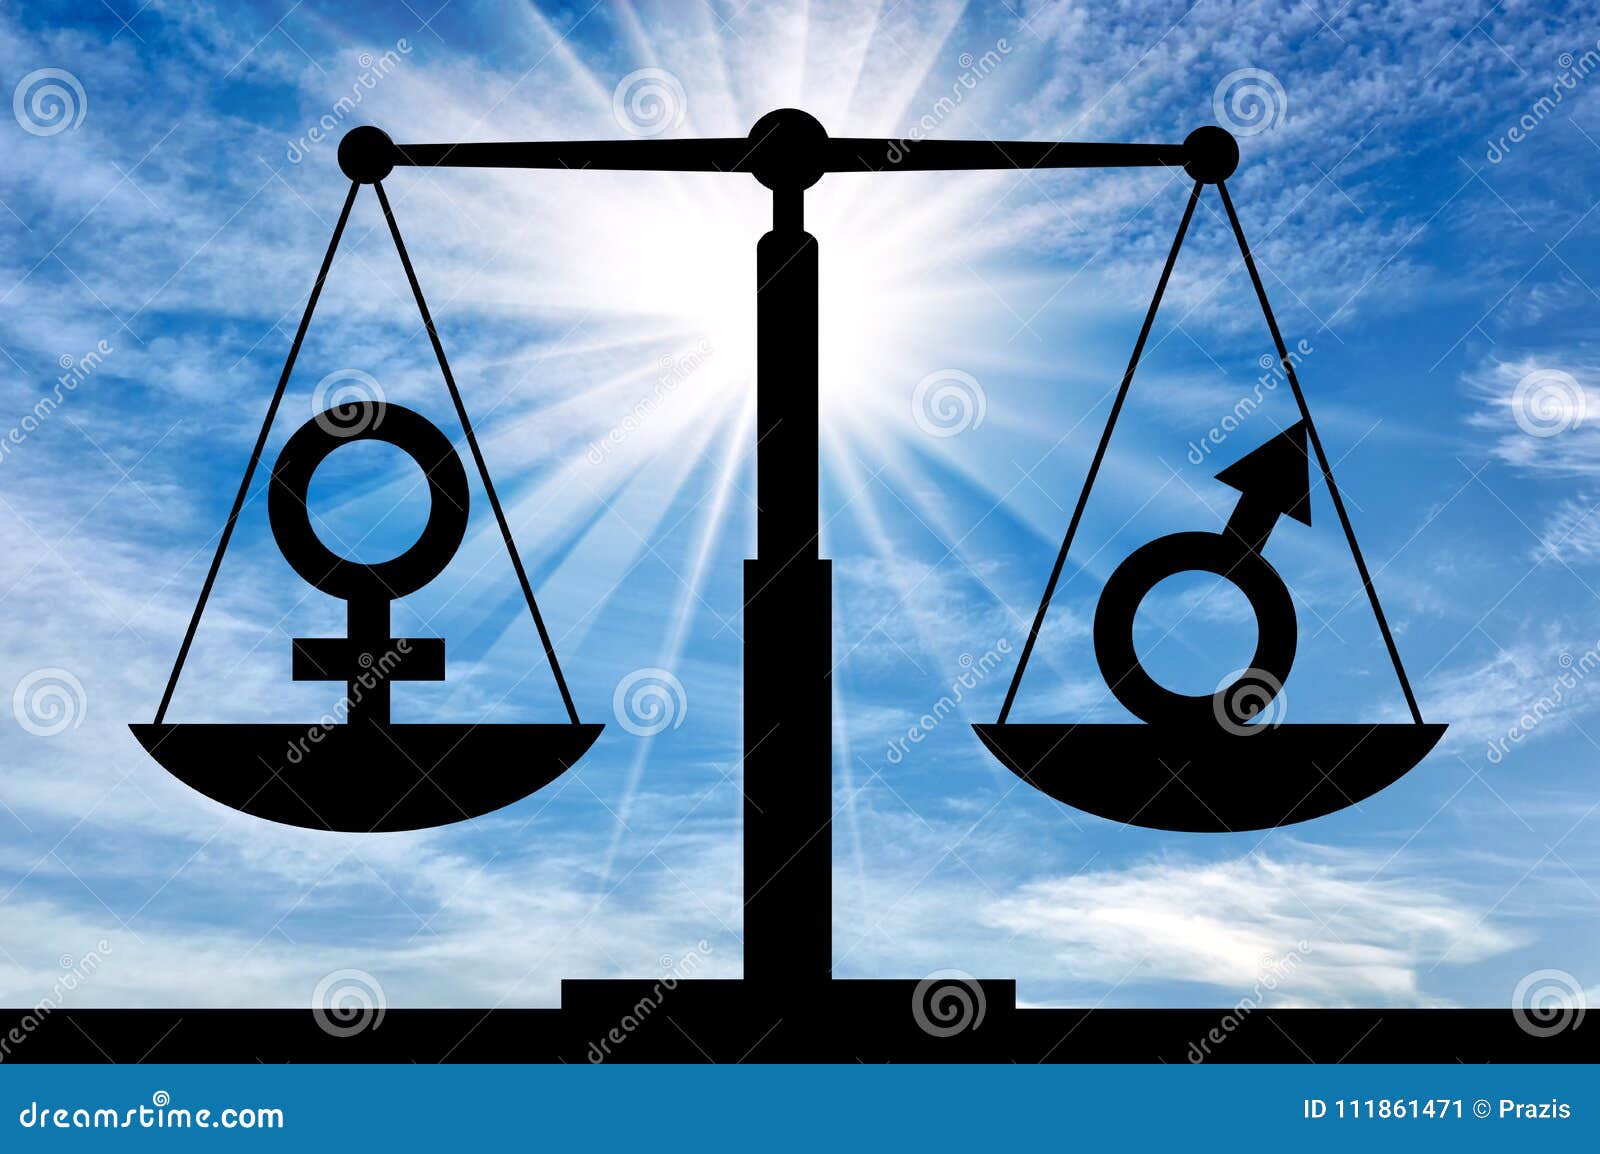 concept of equal rights for women with men